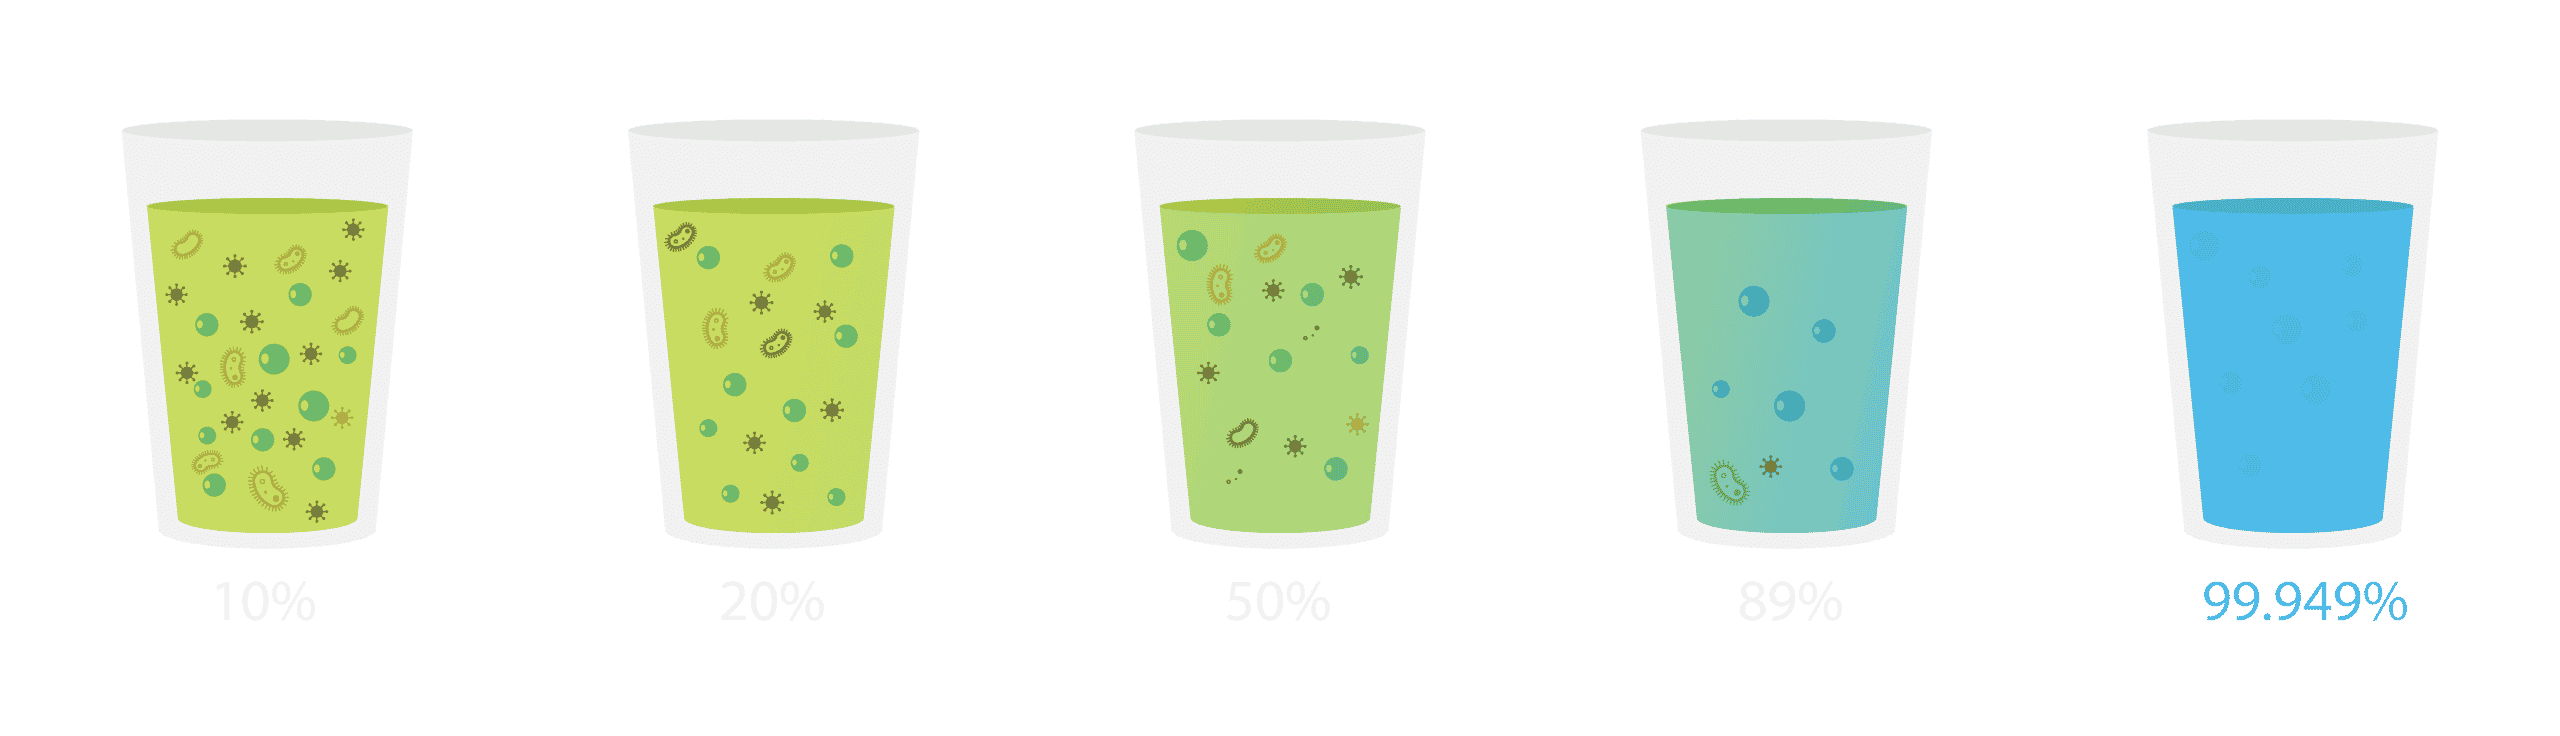 Air Filtration Percentages Represented as Water Glasses